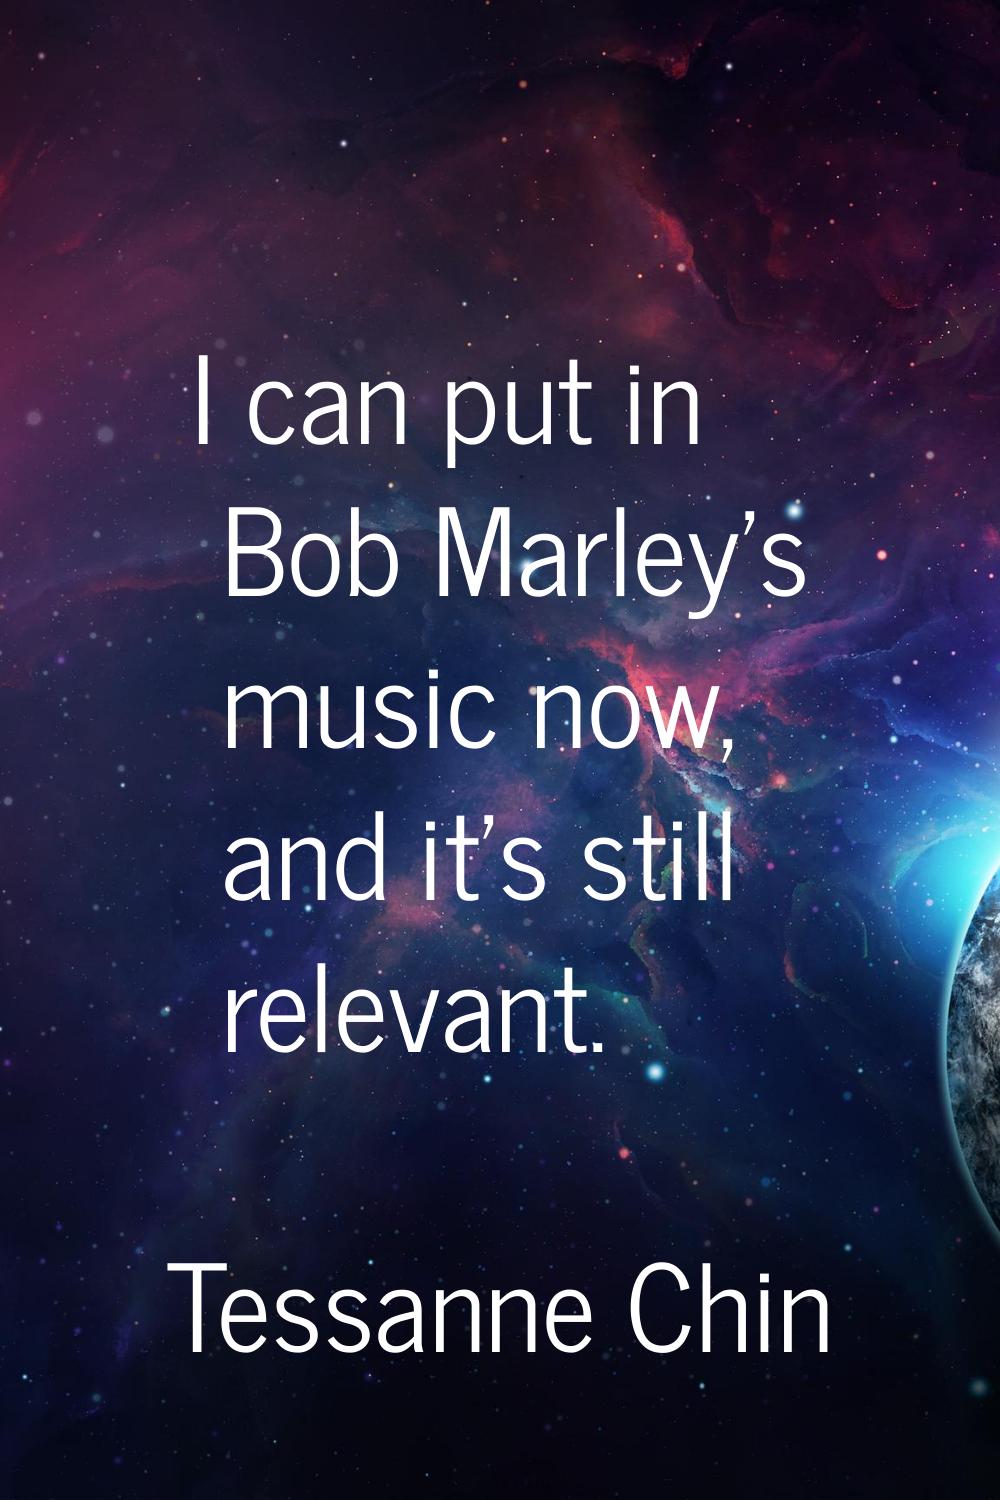 I can put in Bob Marley's music now, and it's still relevant.